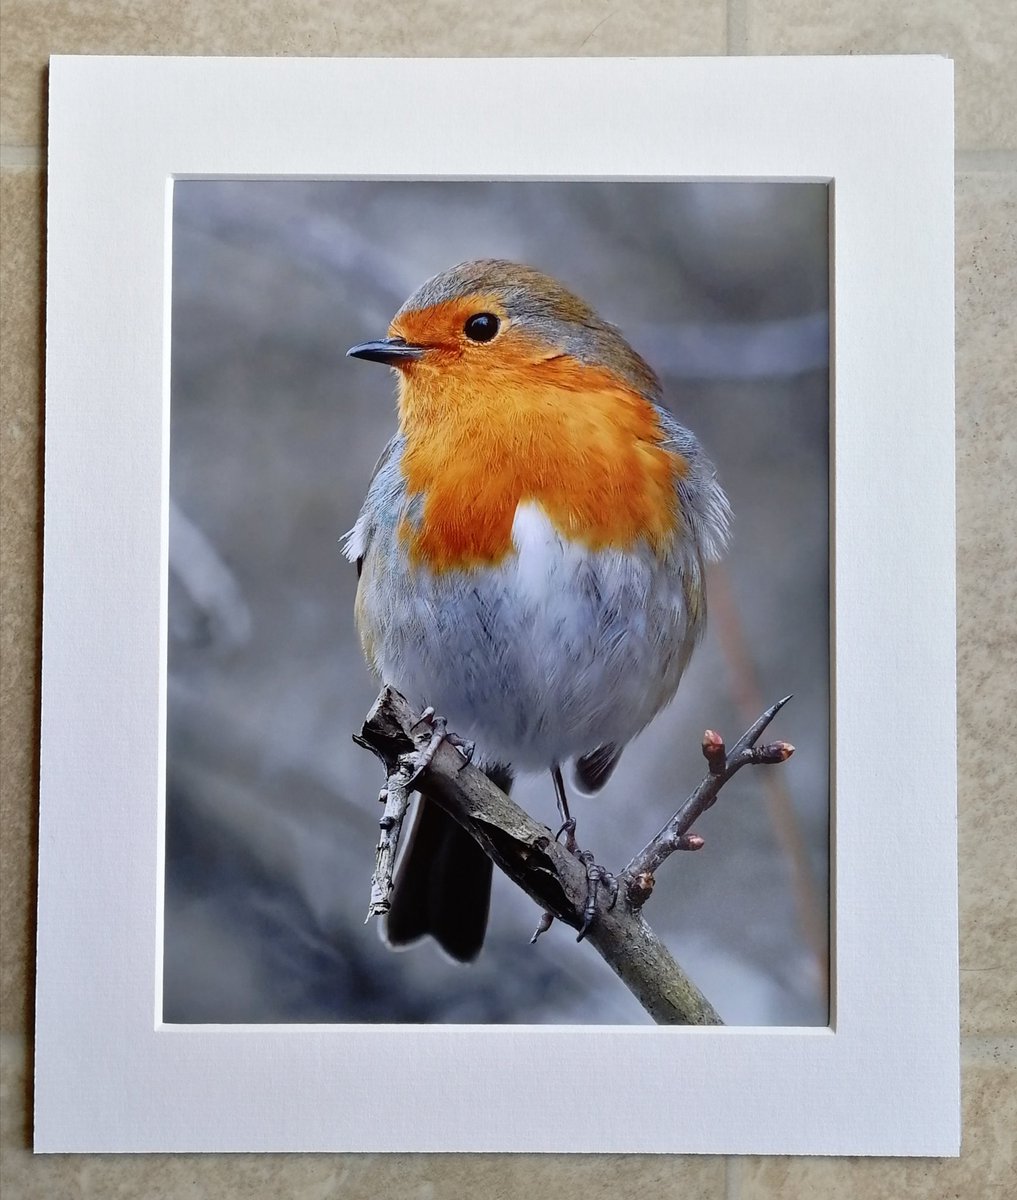 'Proud Robin' 10x8 mounted print. Only posted this photo yesterday, but looks lovely as a mounted print! You can buy it here; https://www.carlbovis.com//product-page/proud-robin-10x8-mounted-print 